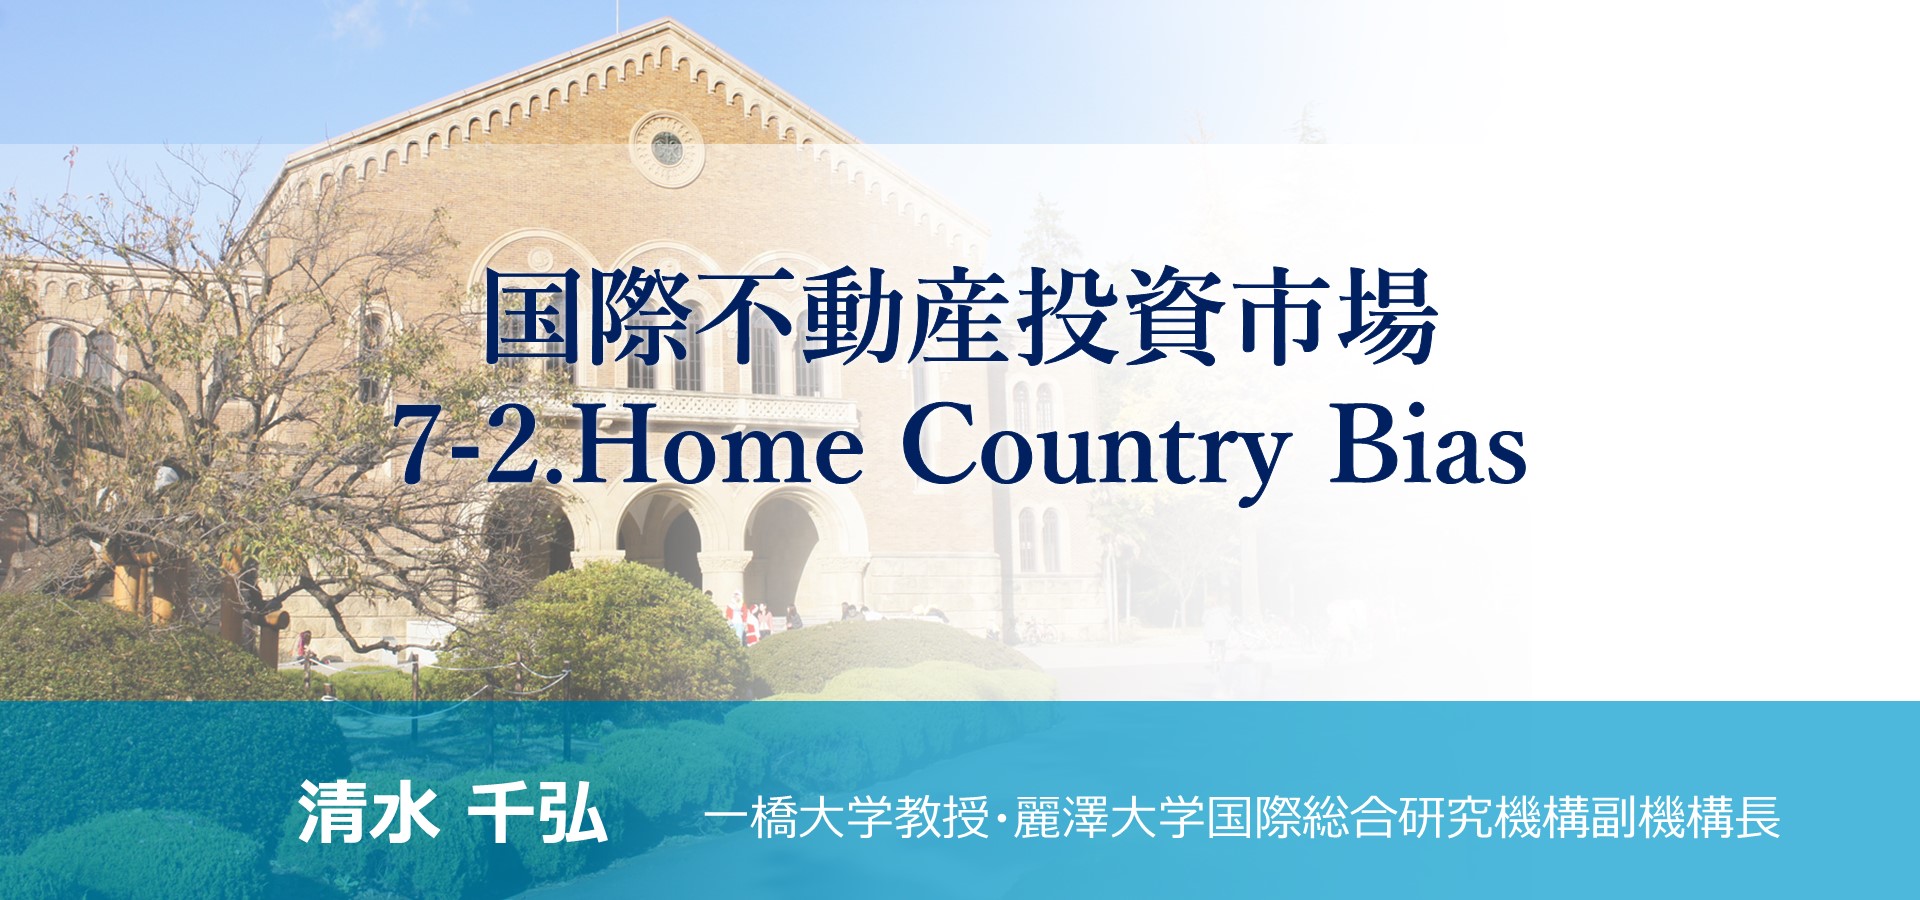 「7-2. Home Country Bias」のアイキャッチ画像